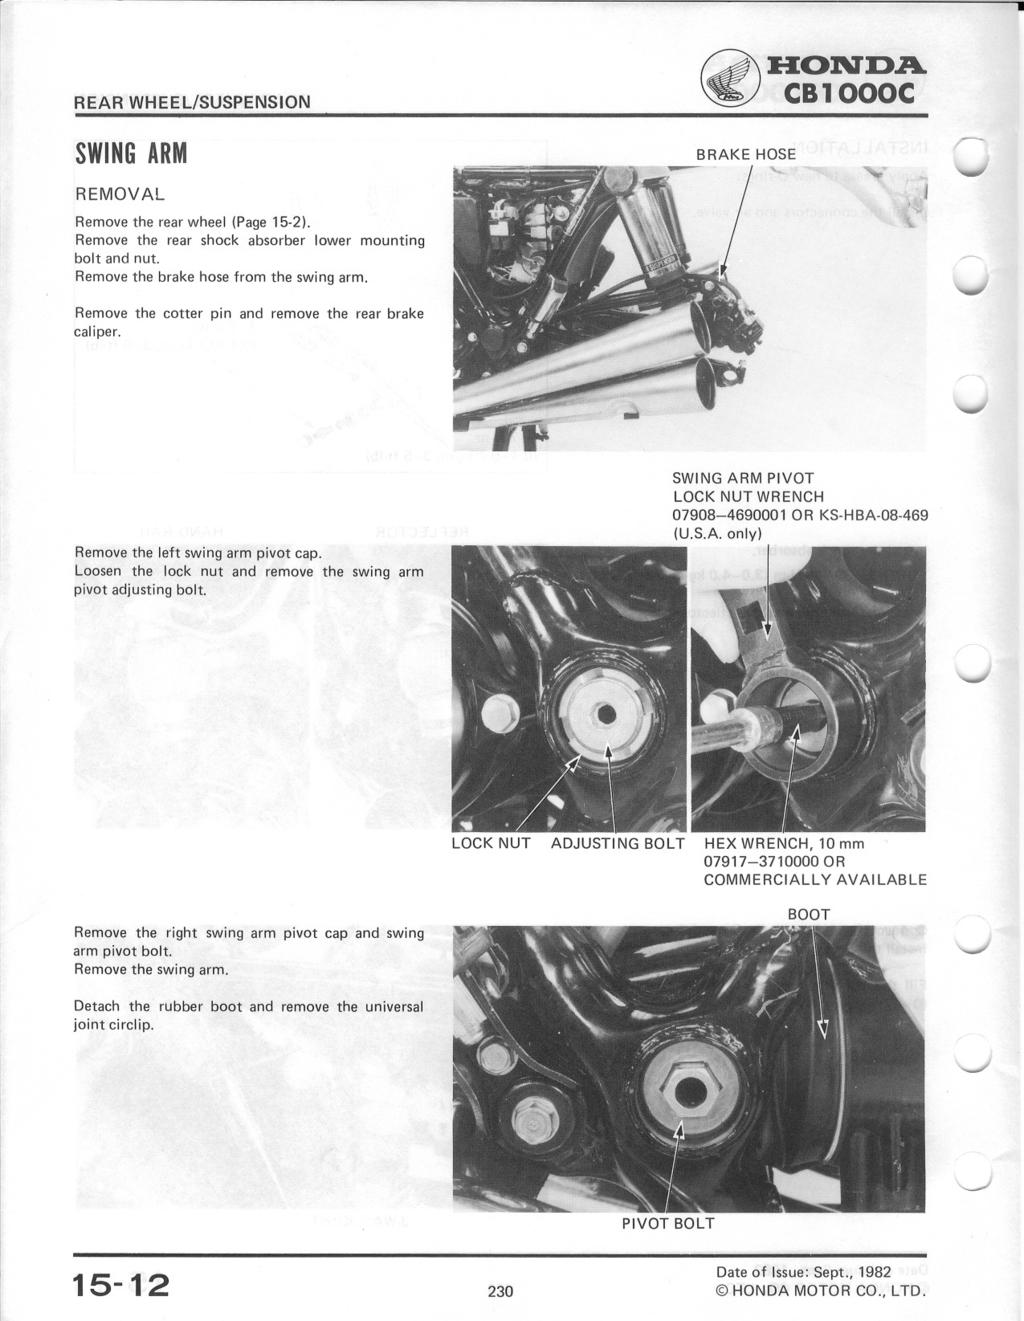 ~ ~Ol'\TD.A. CB1000C SWING ARM BRAKE HOSE REMOV AL Remove the rear wheel (Page 15-2). Remove the rear shock absorber lower mounting bolt and nut. Remove the brake hose from the swing arm.